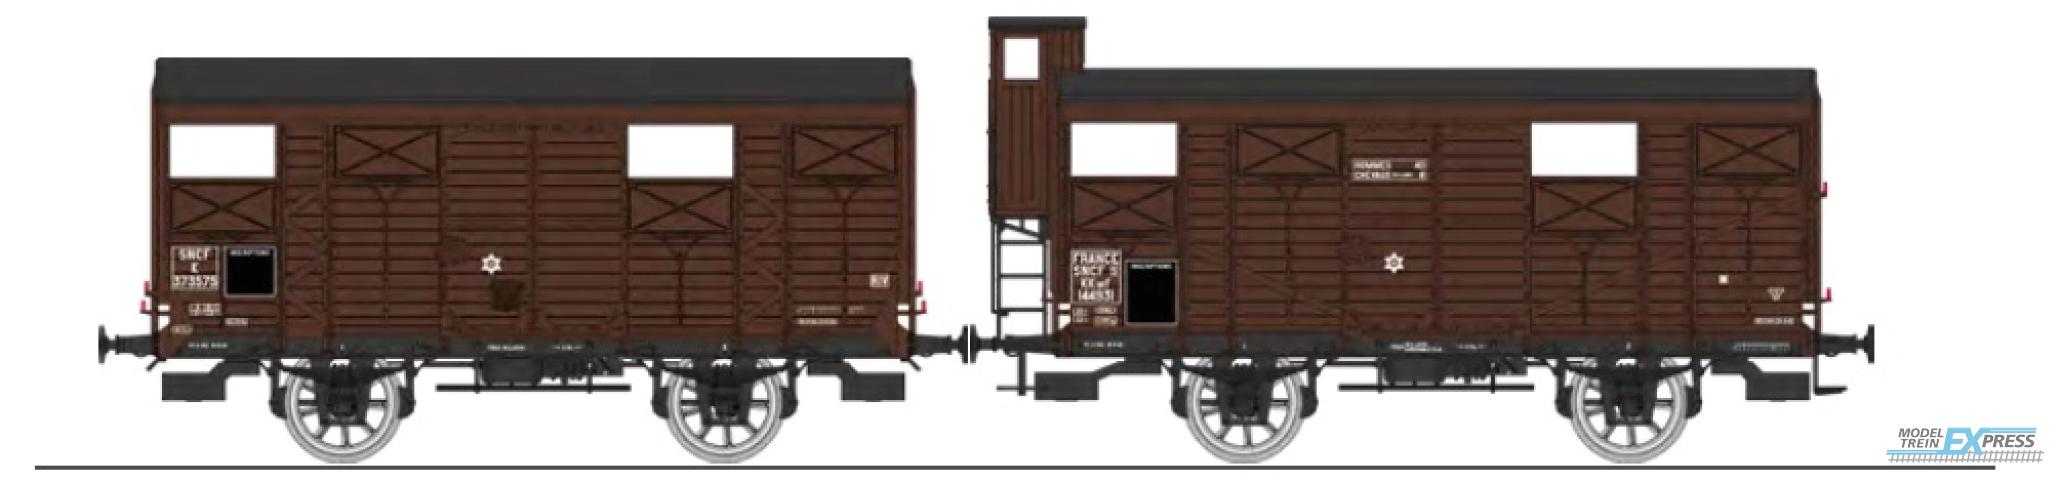 REE models WB-701 Set of 2 PLM 20 T Closed Wagon brown, N° K 373575 with Z body reinforcements, et N° Kf 391789 with brakesman home,